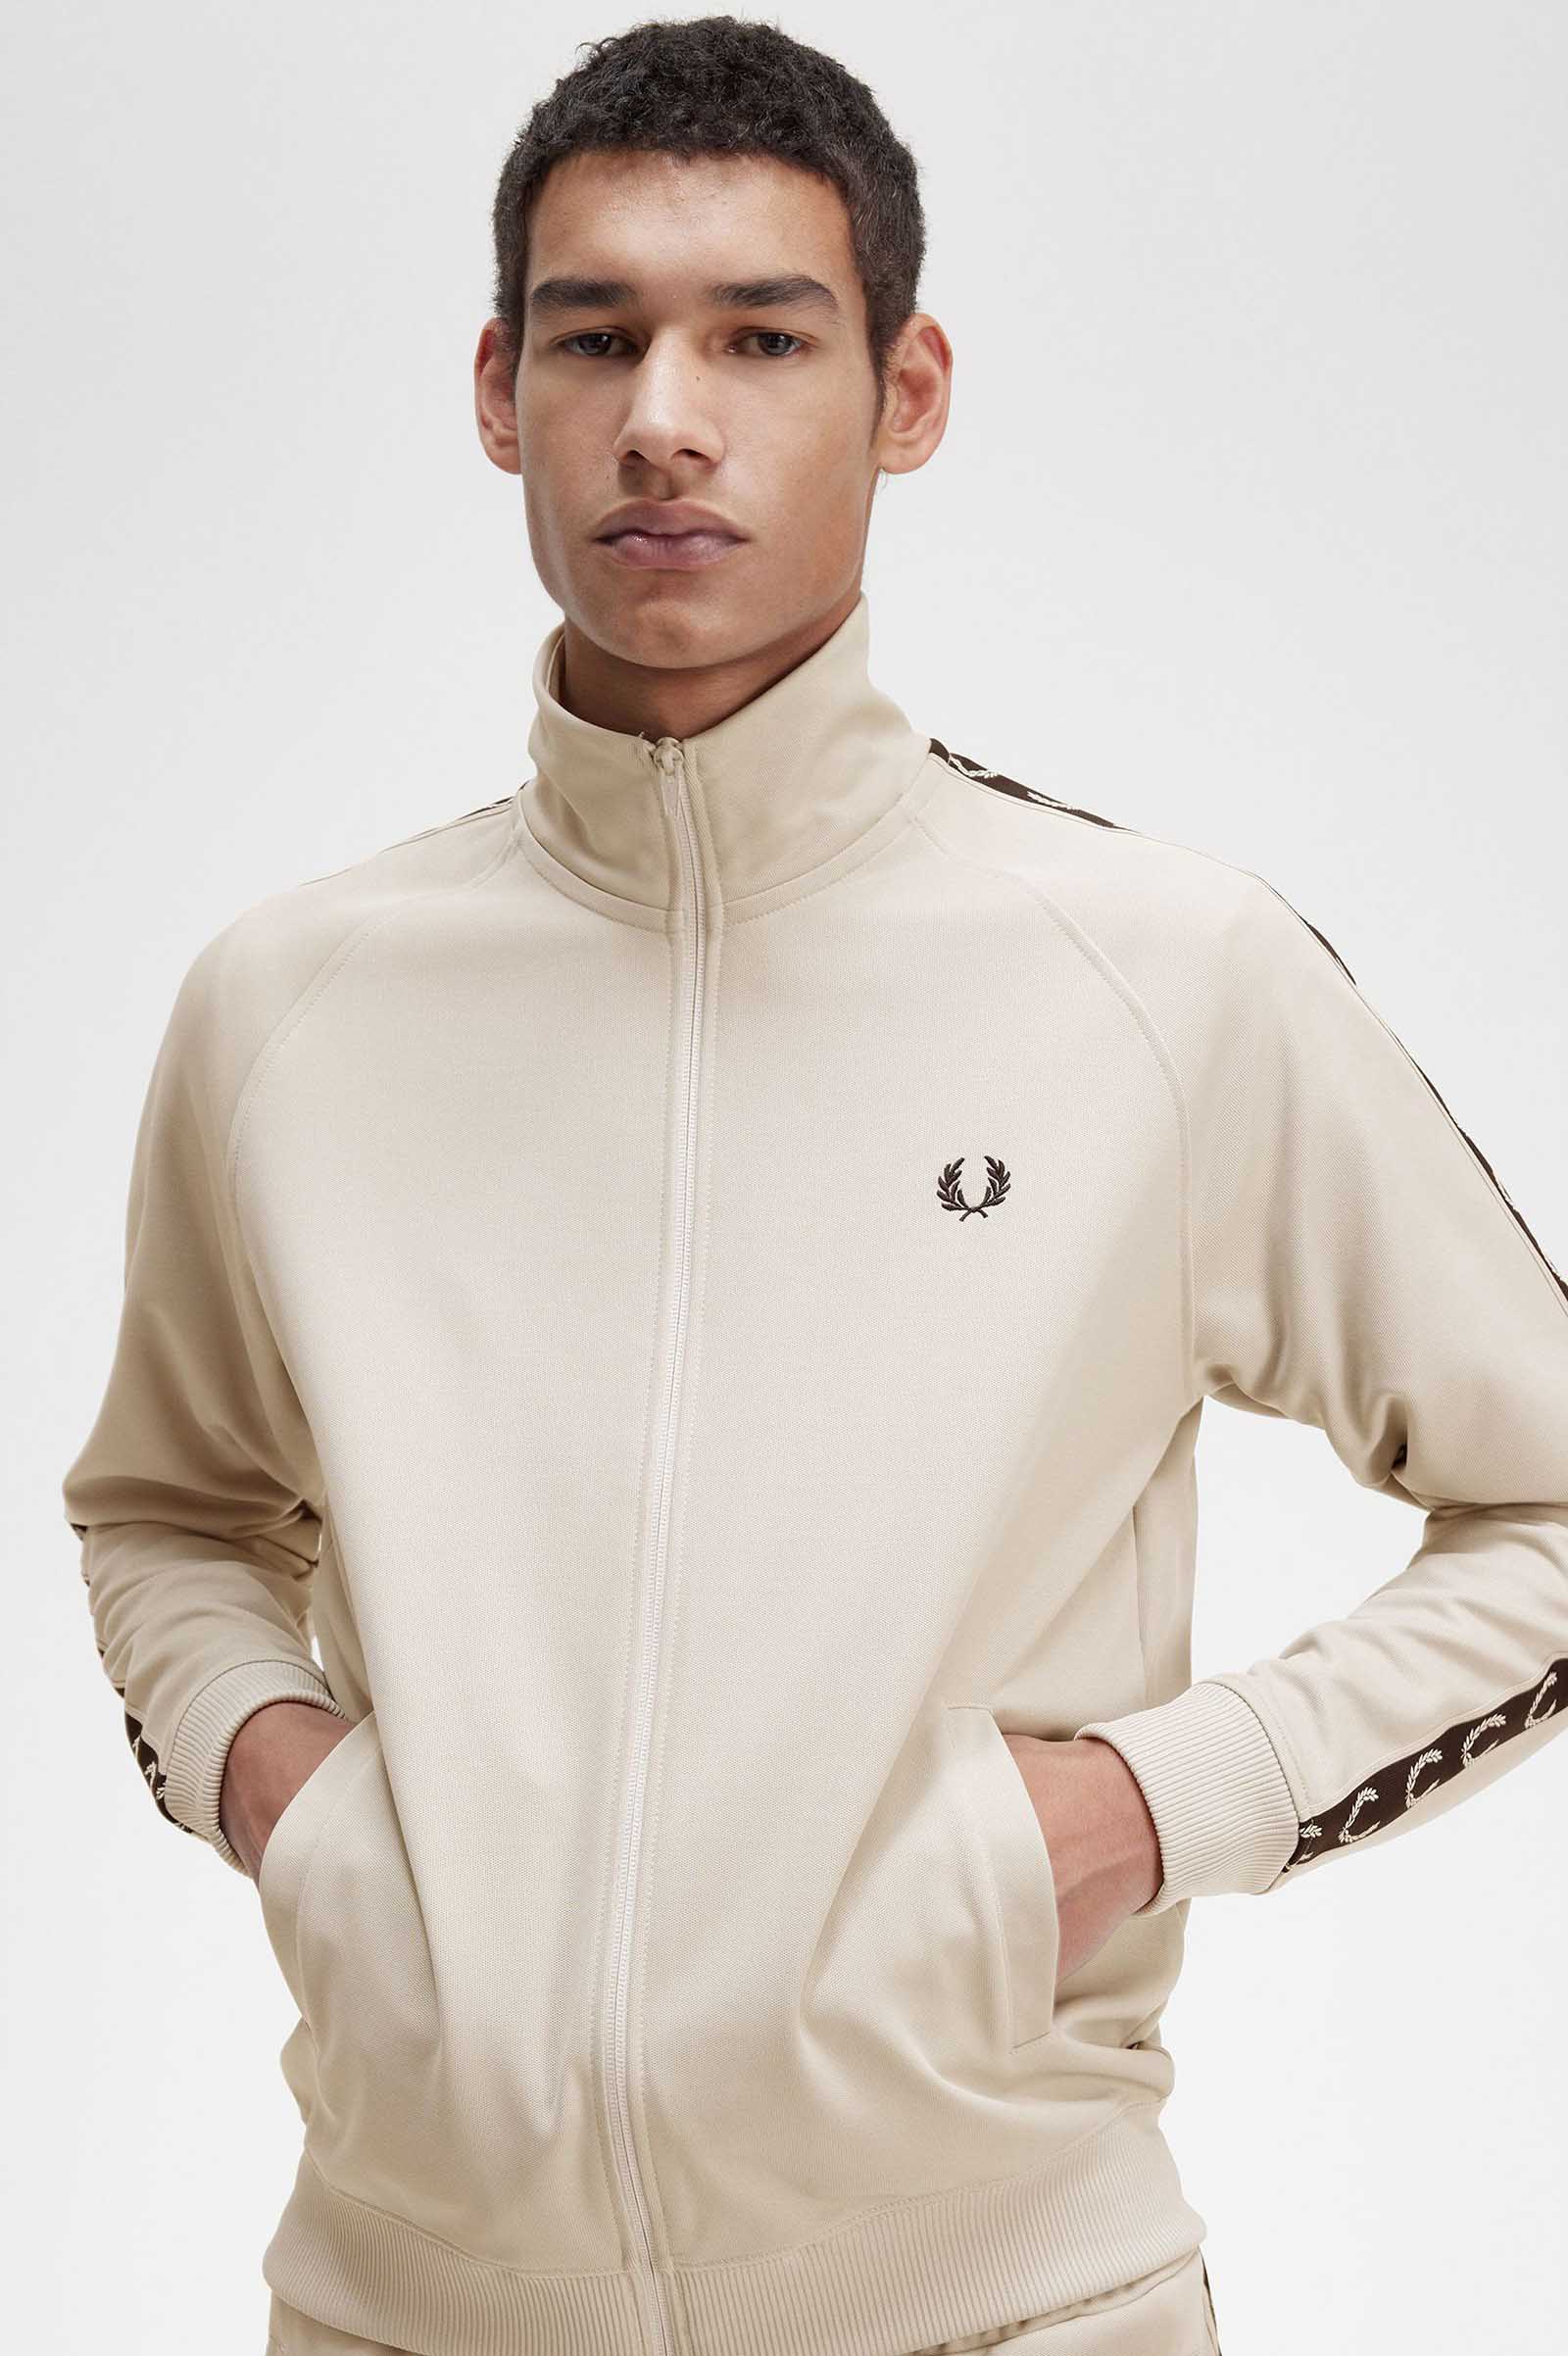 FRED PERRY CONTRAST TAPE TRACK JACKET